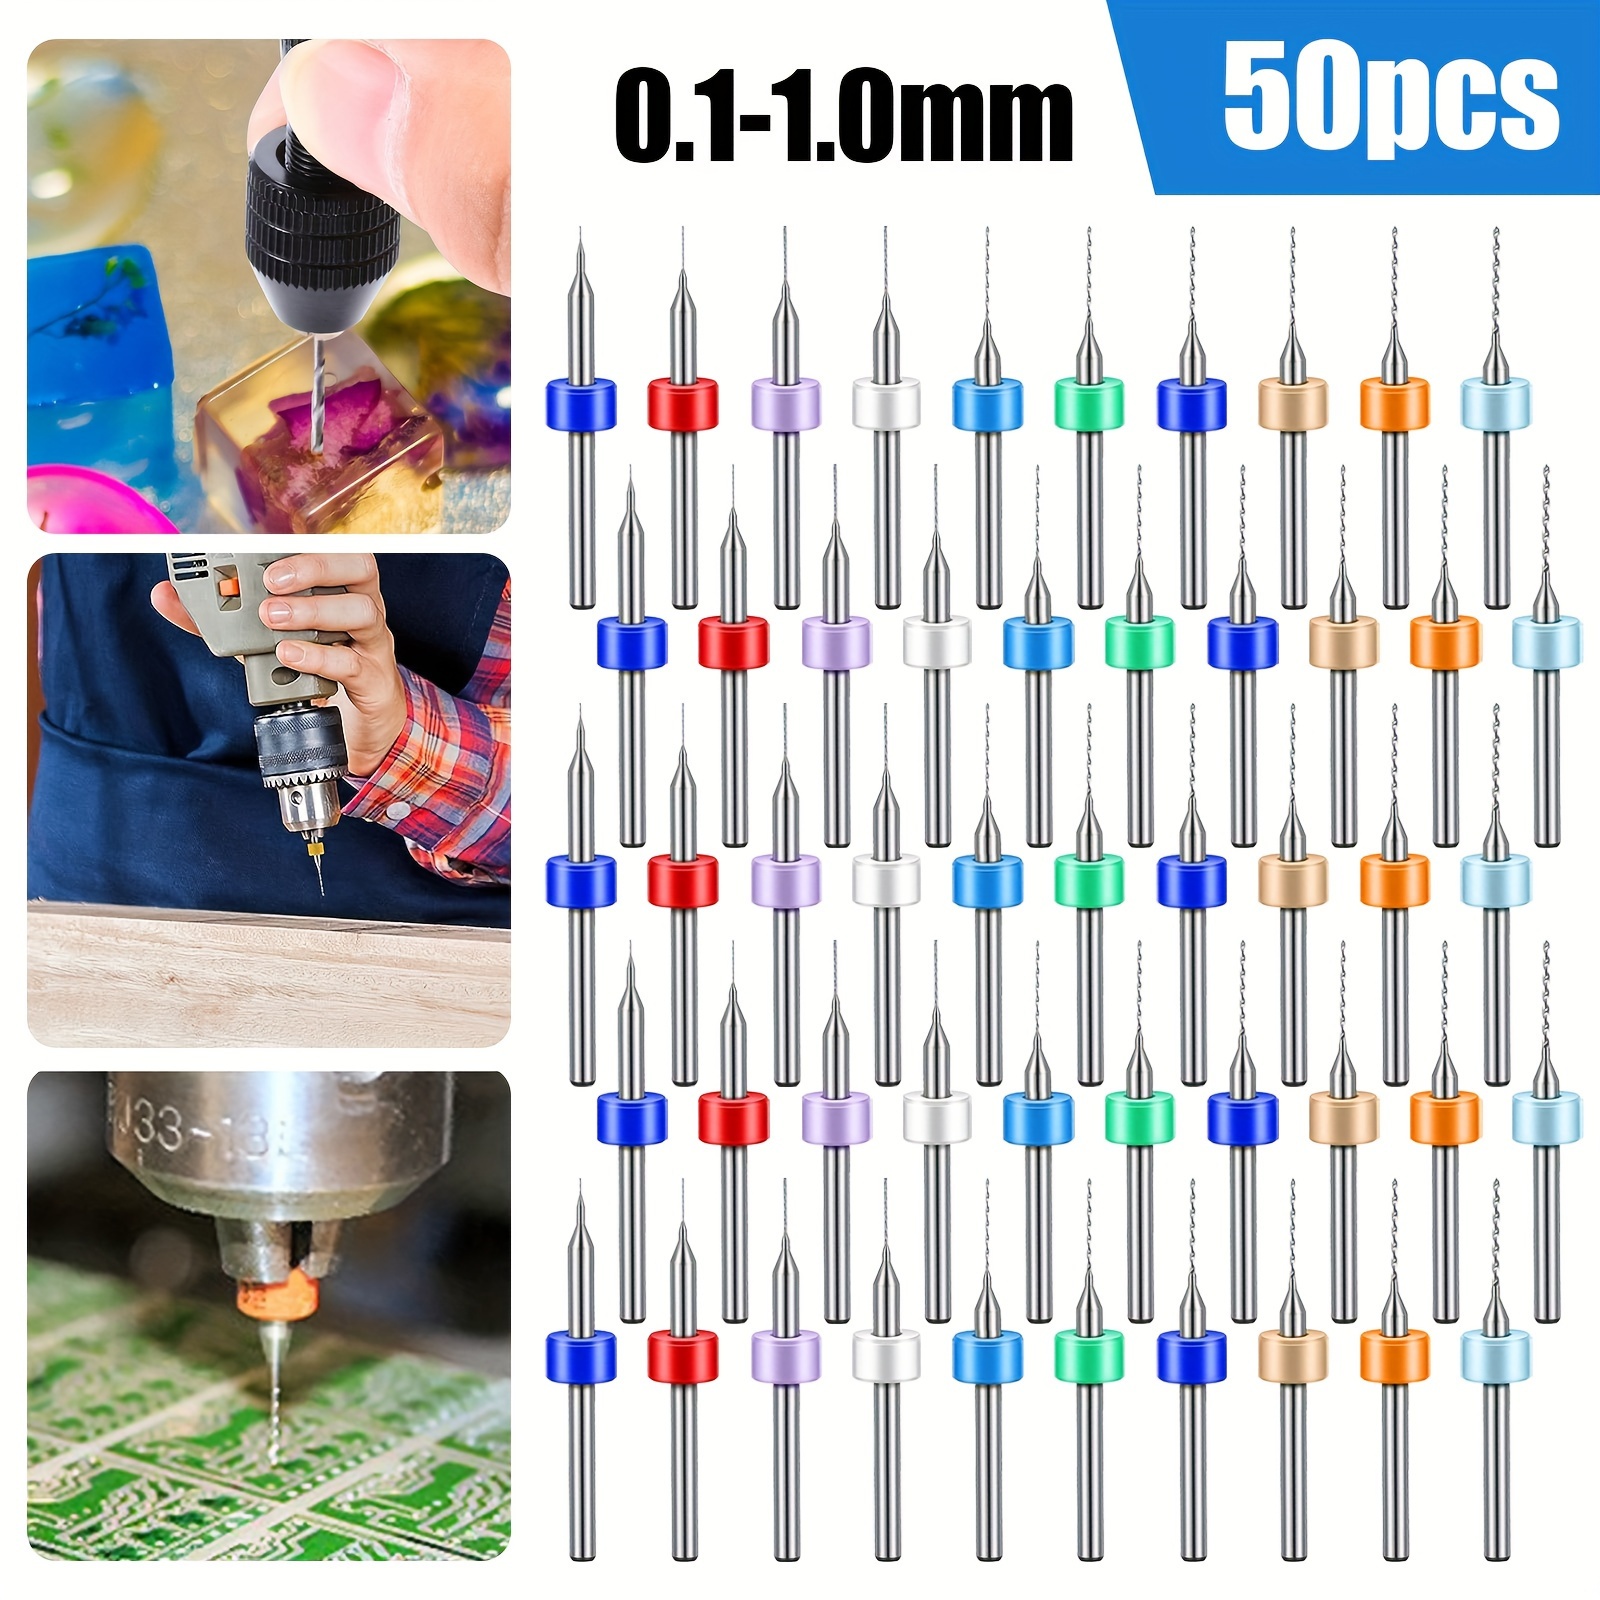 

50pcs Micro Pcb Drill Bits Set, Carbide 0.1-1.0mm For Print Circuit Board Stone Rotary Tools Jewelry Cnc Engraving